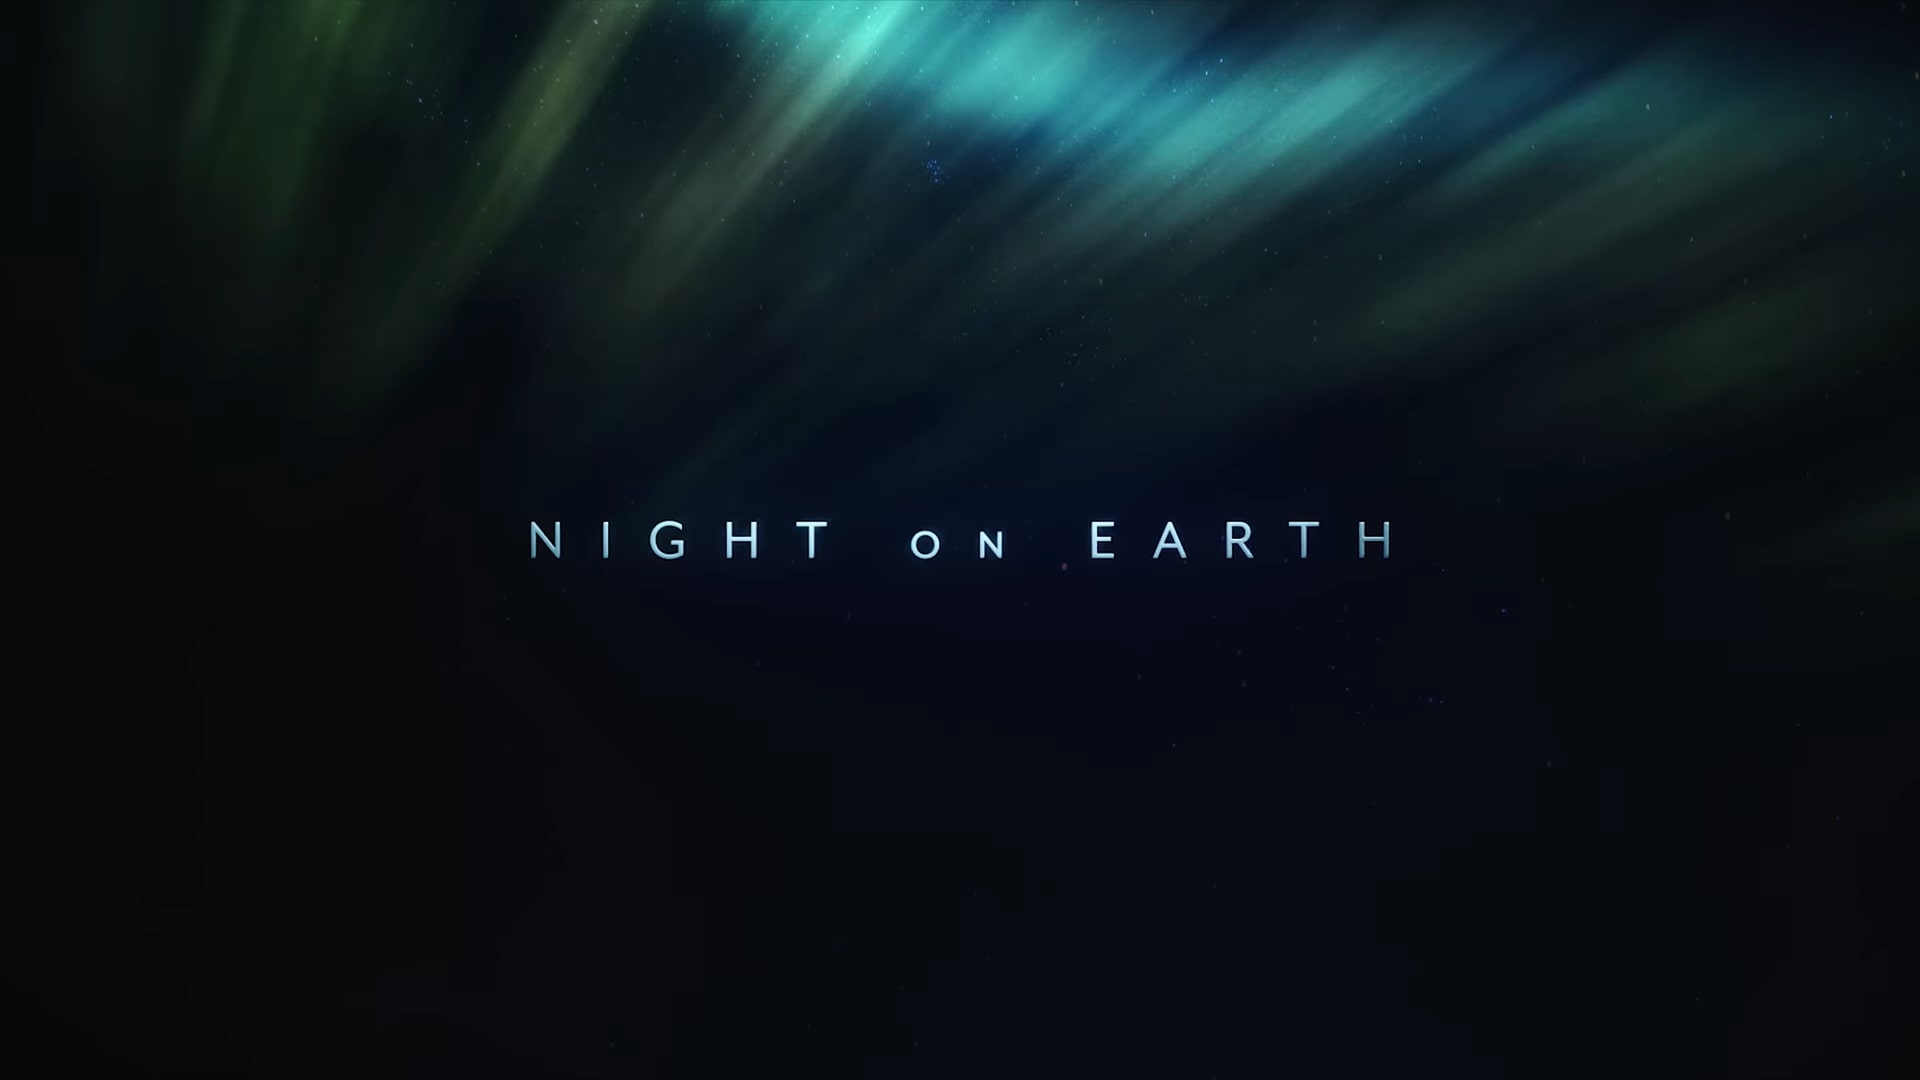 Night on Earth Netflix Trailer, Netflix Nature Series, Netflix Science Shows, Netflix Documentary Series, Coming to Netflix in January 2020